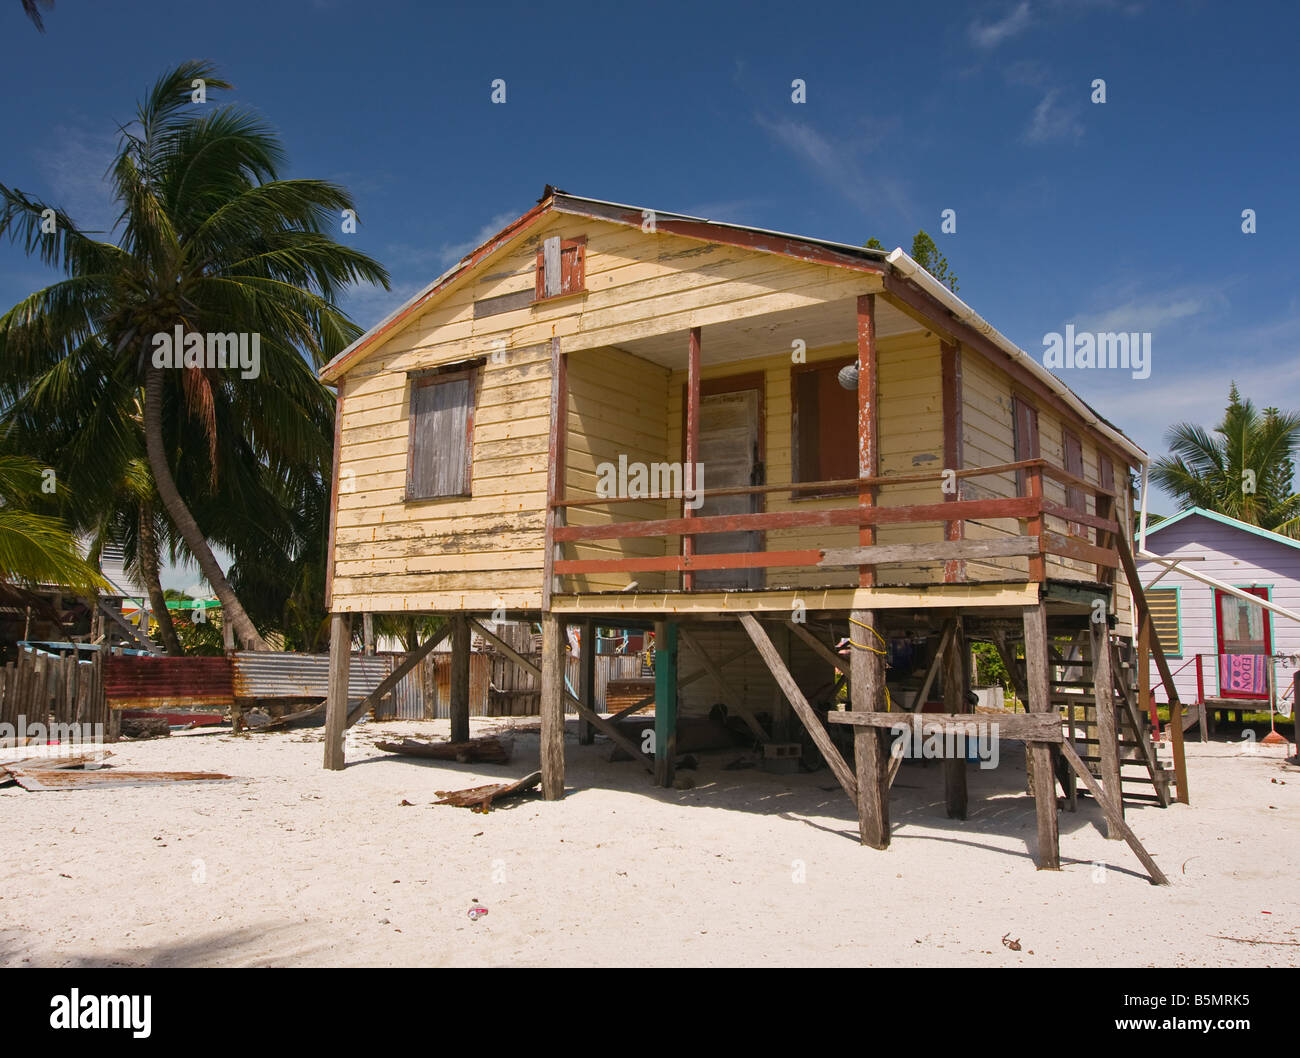 CAYE CAULKER BELIZE Wooden house on stilts on sand beach with palm trees Stock Photo